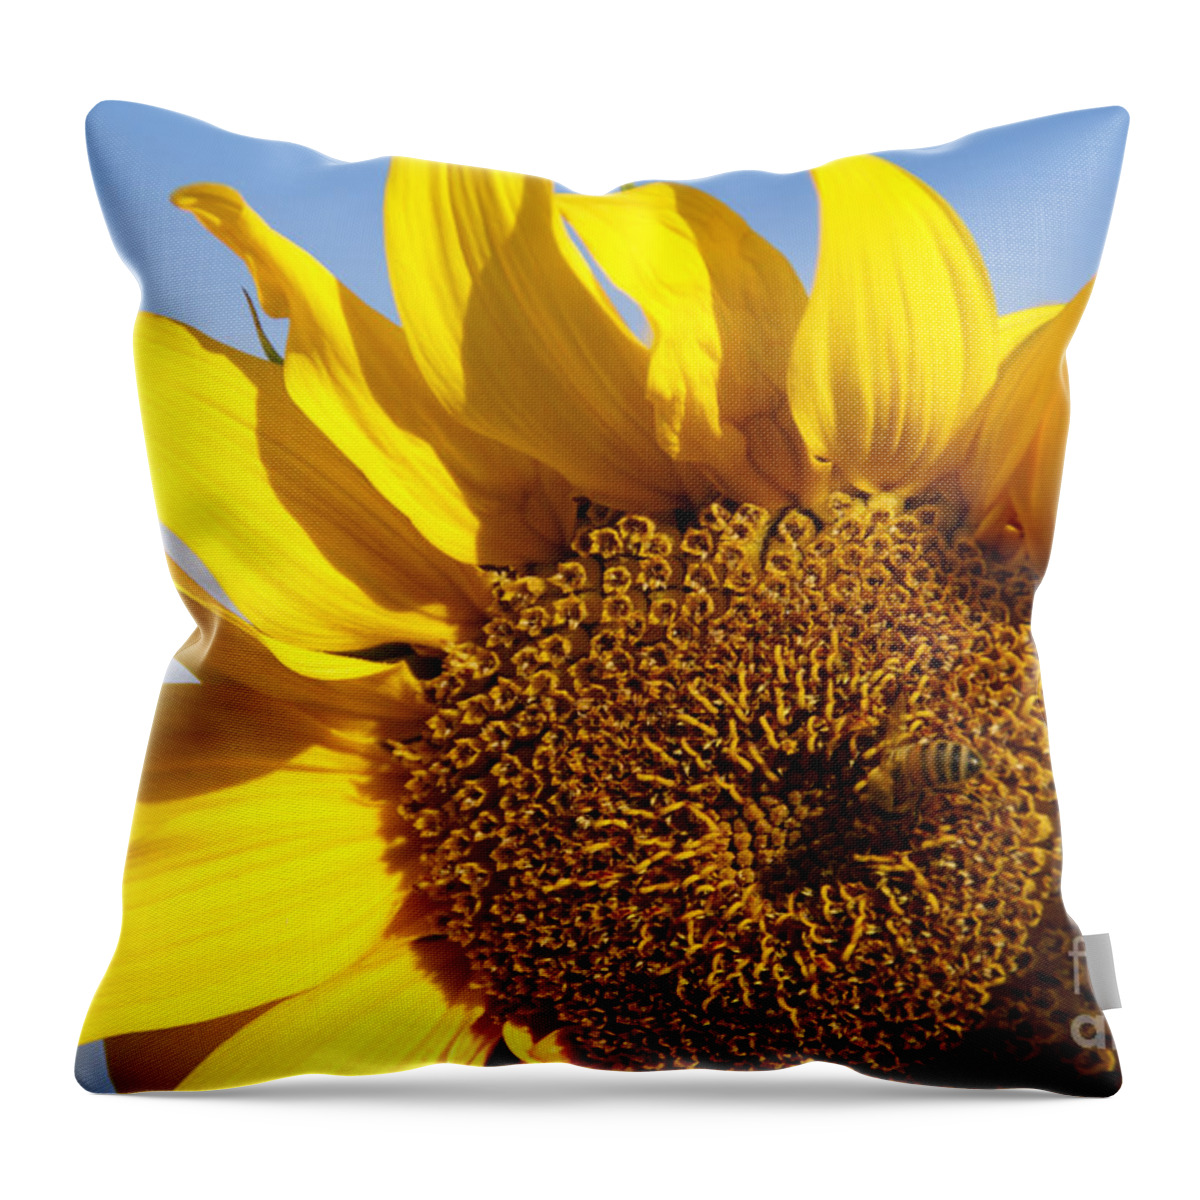 Sunflower Throw Pillow featuring the photograph Summer Love by Linda Shafer